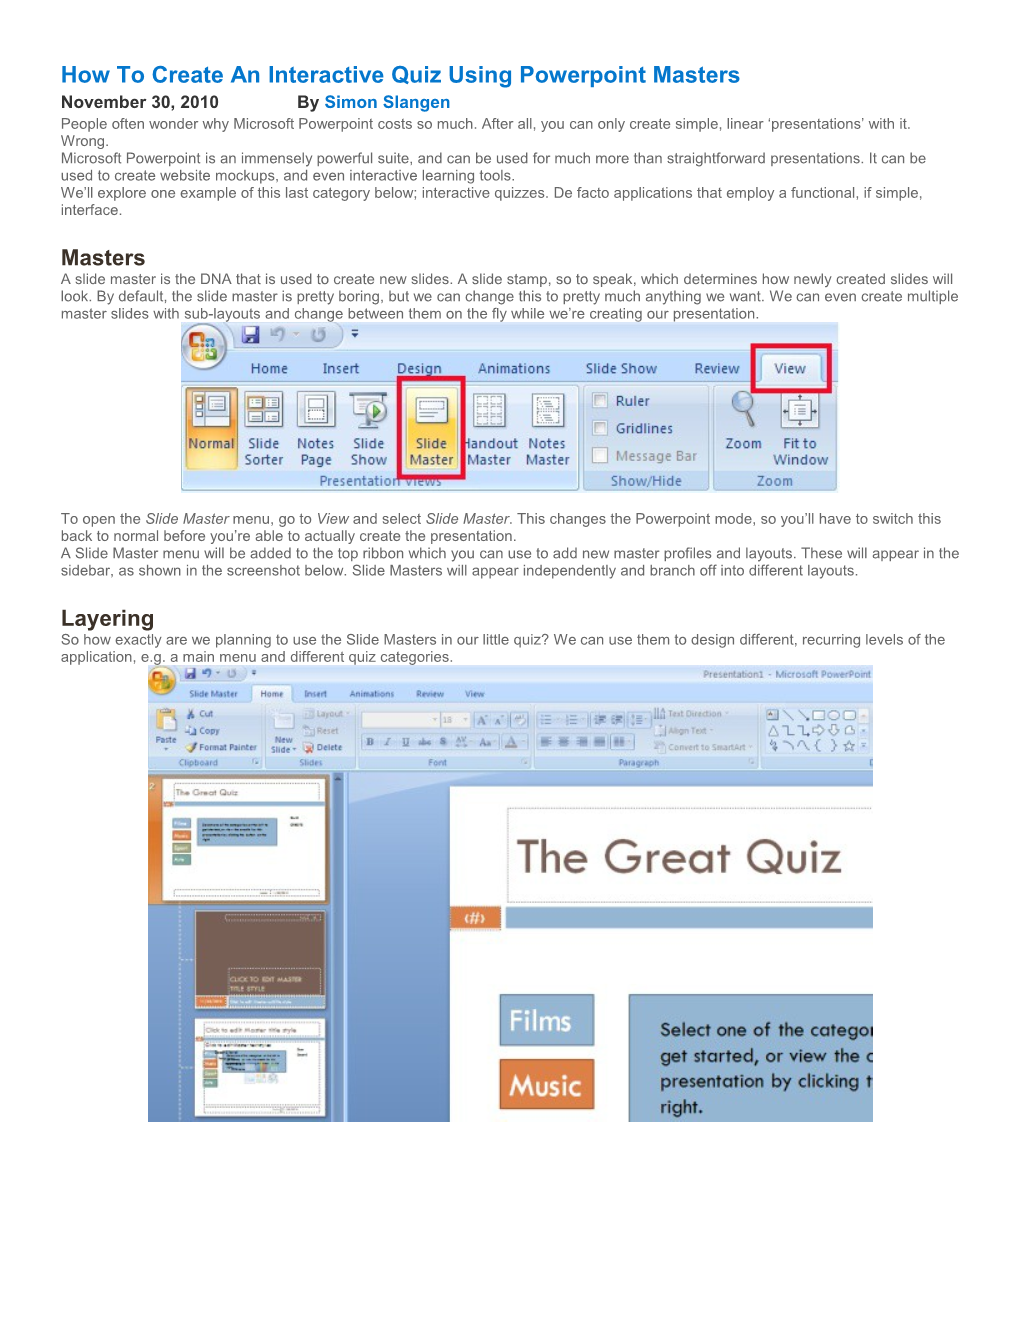 How to Create an Interactive Quiz Using Powerpoint Masters